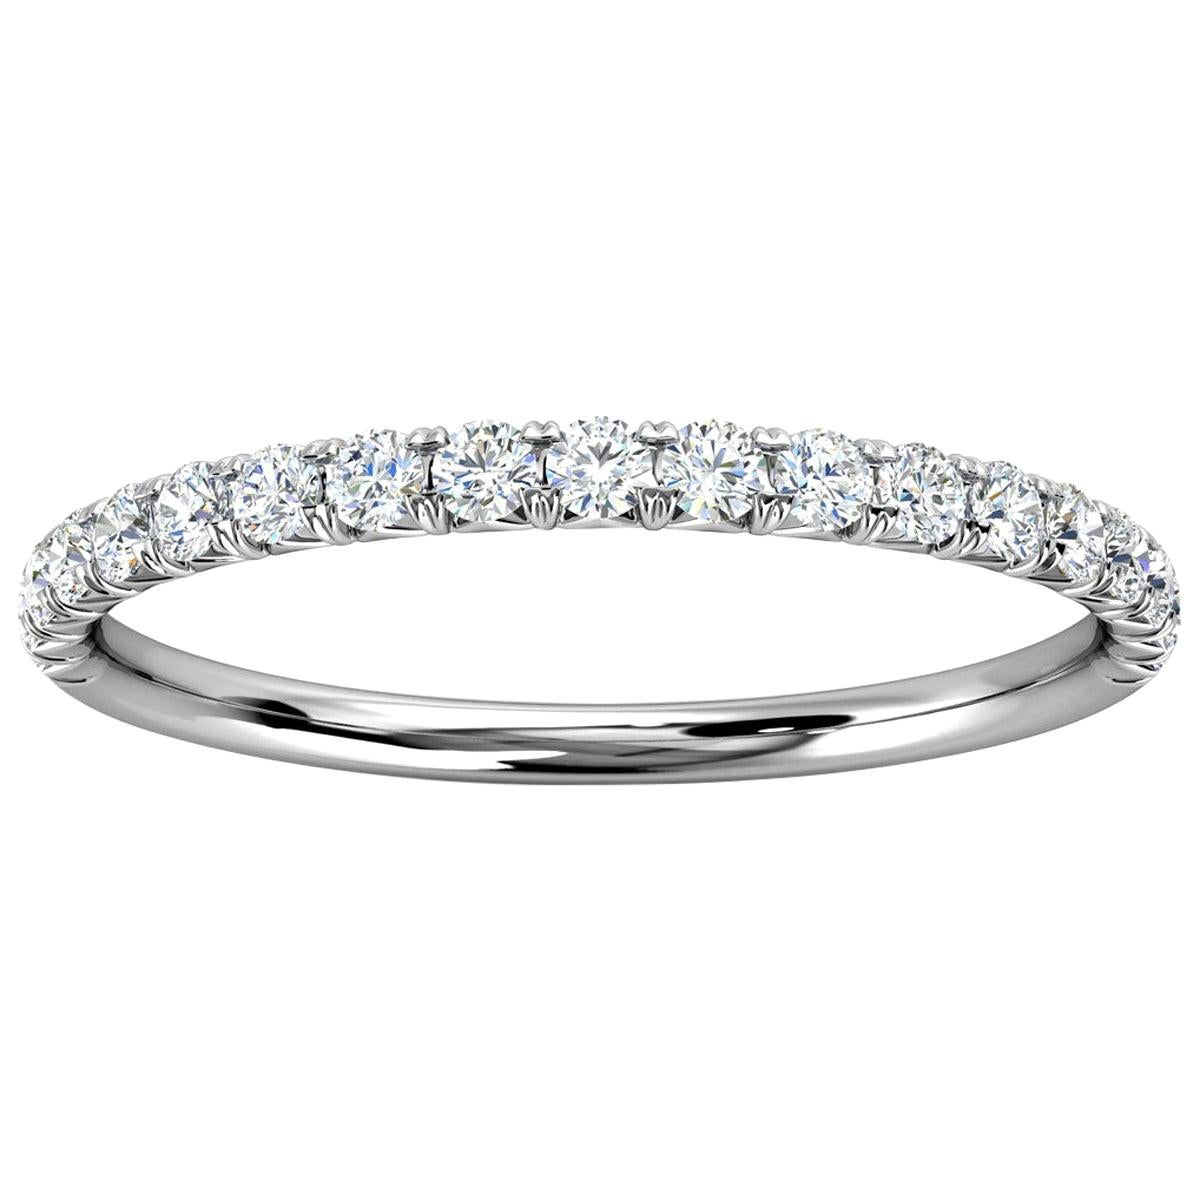 For Sale:  Platinum Voyage French Pave Diamond Ring '1/4 Ct. Tw'